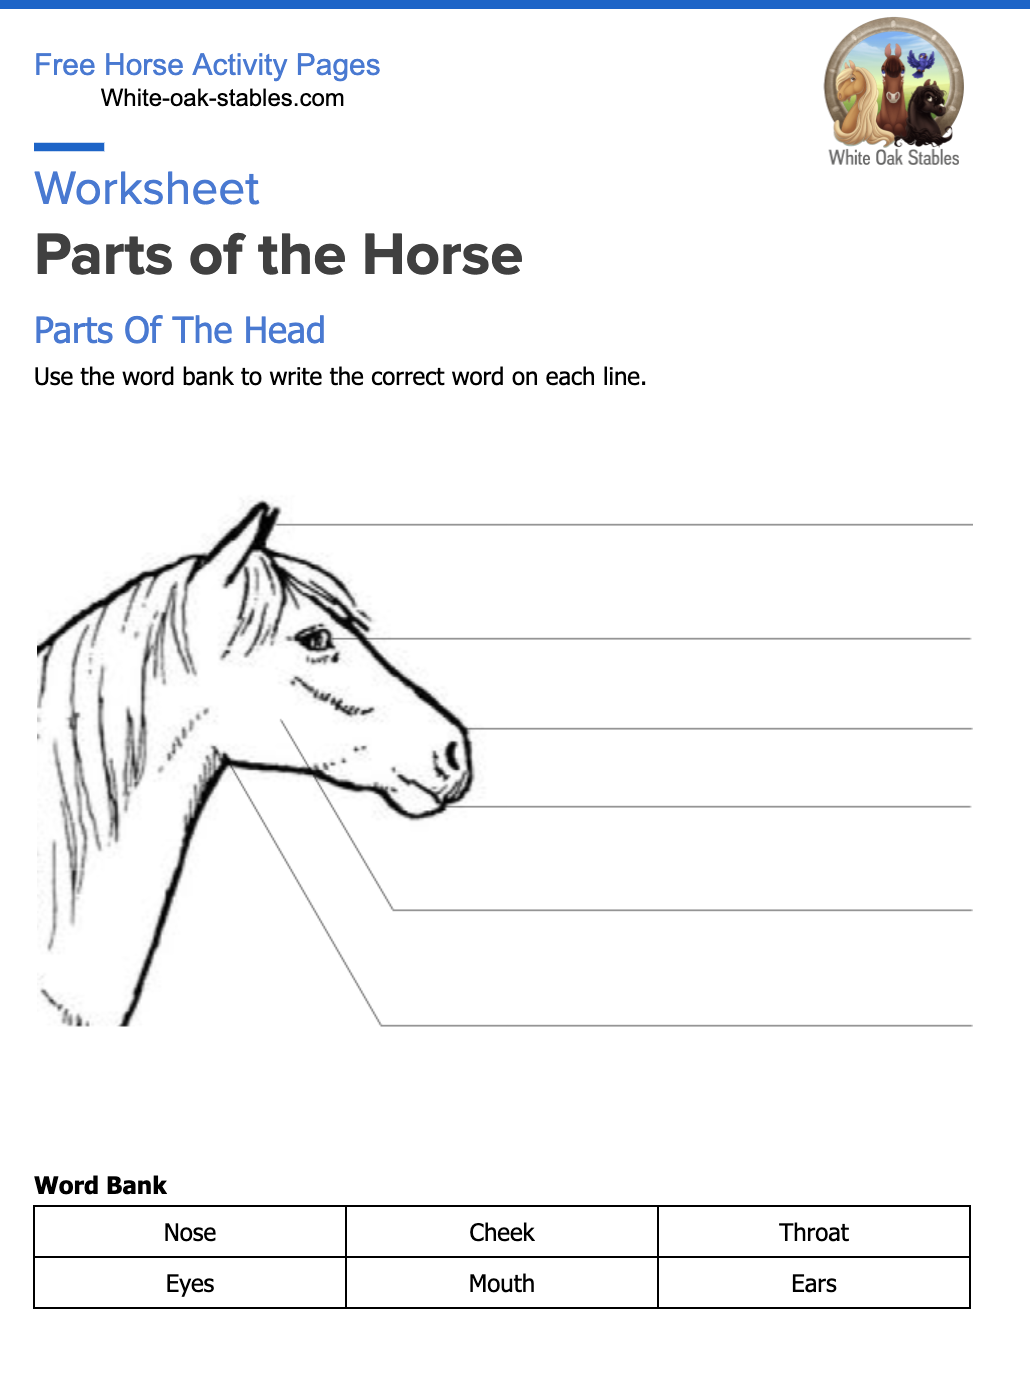 Worksheet – Parts of the Horse